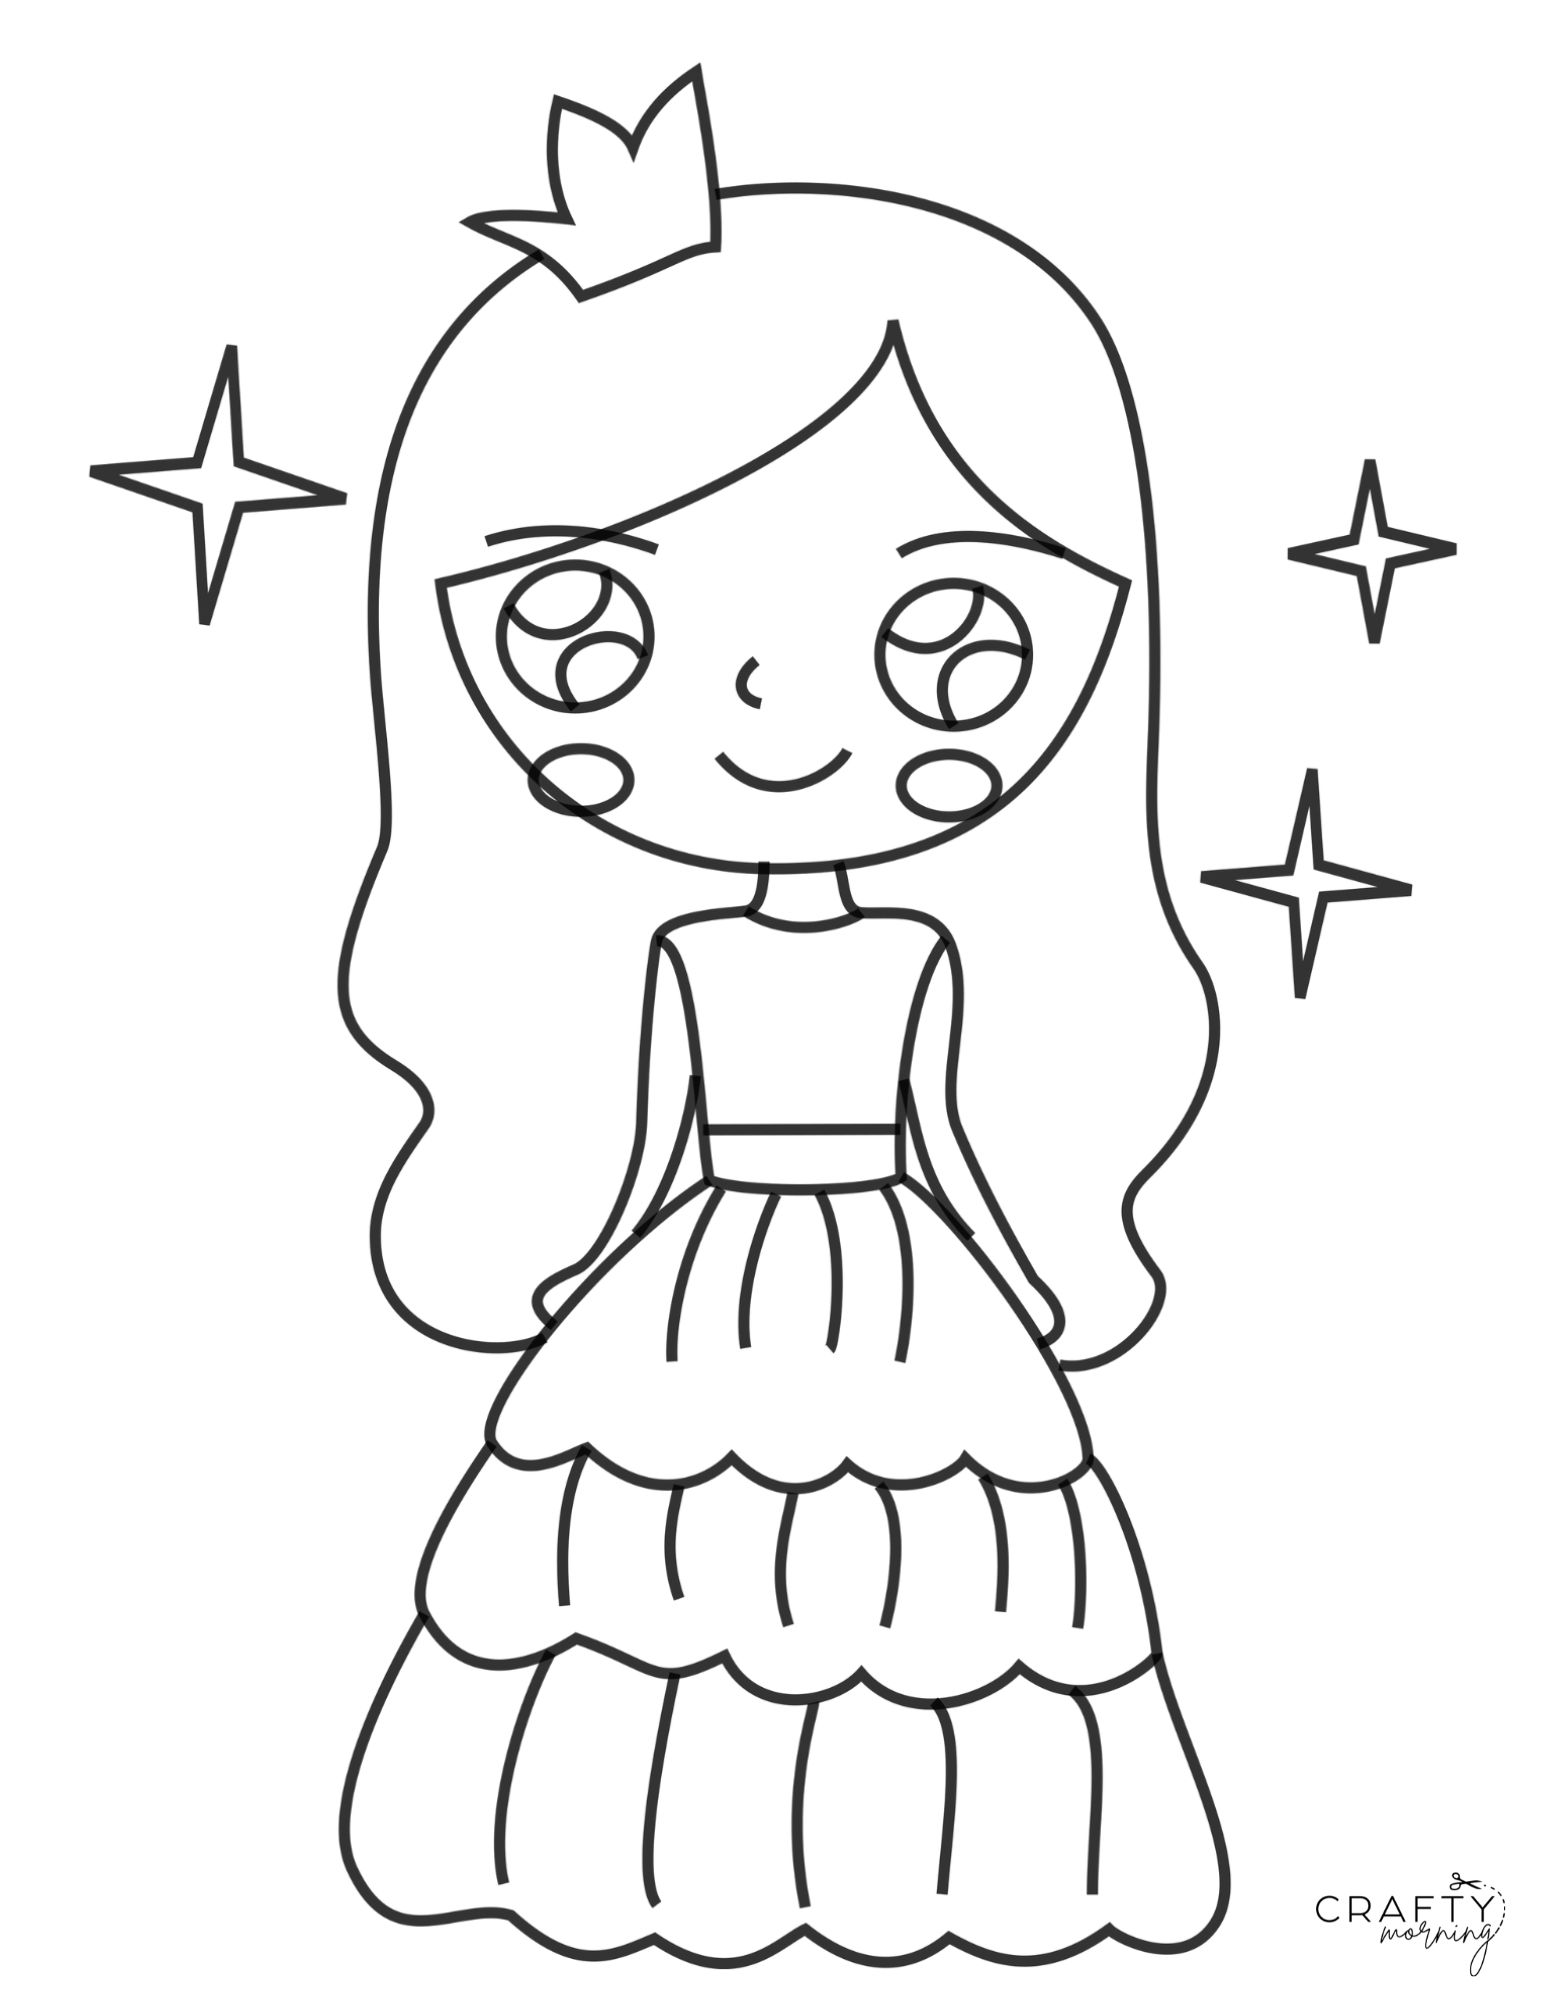 princes drawing coloring page